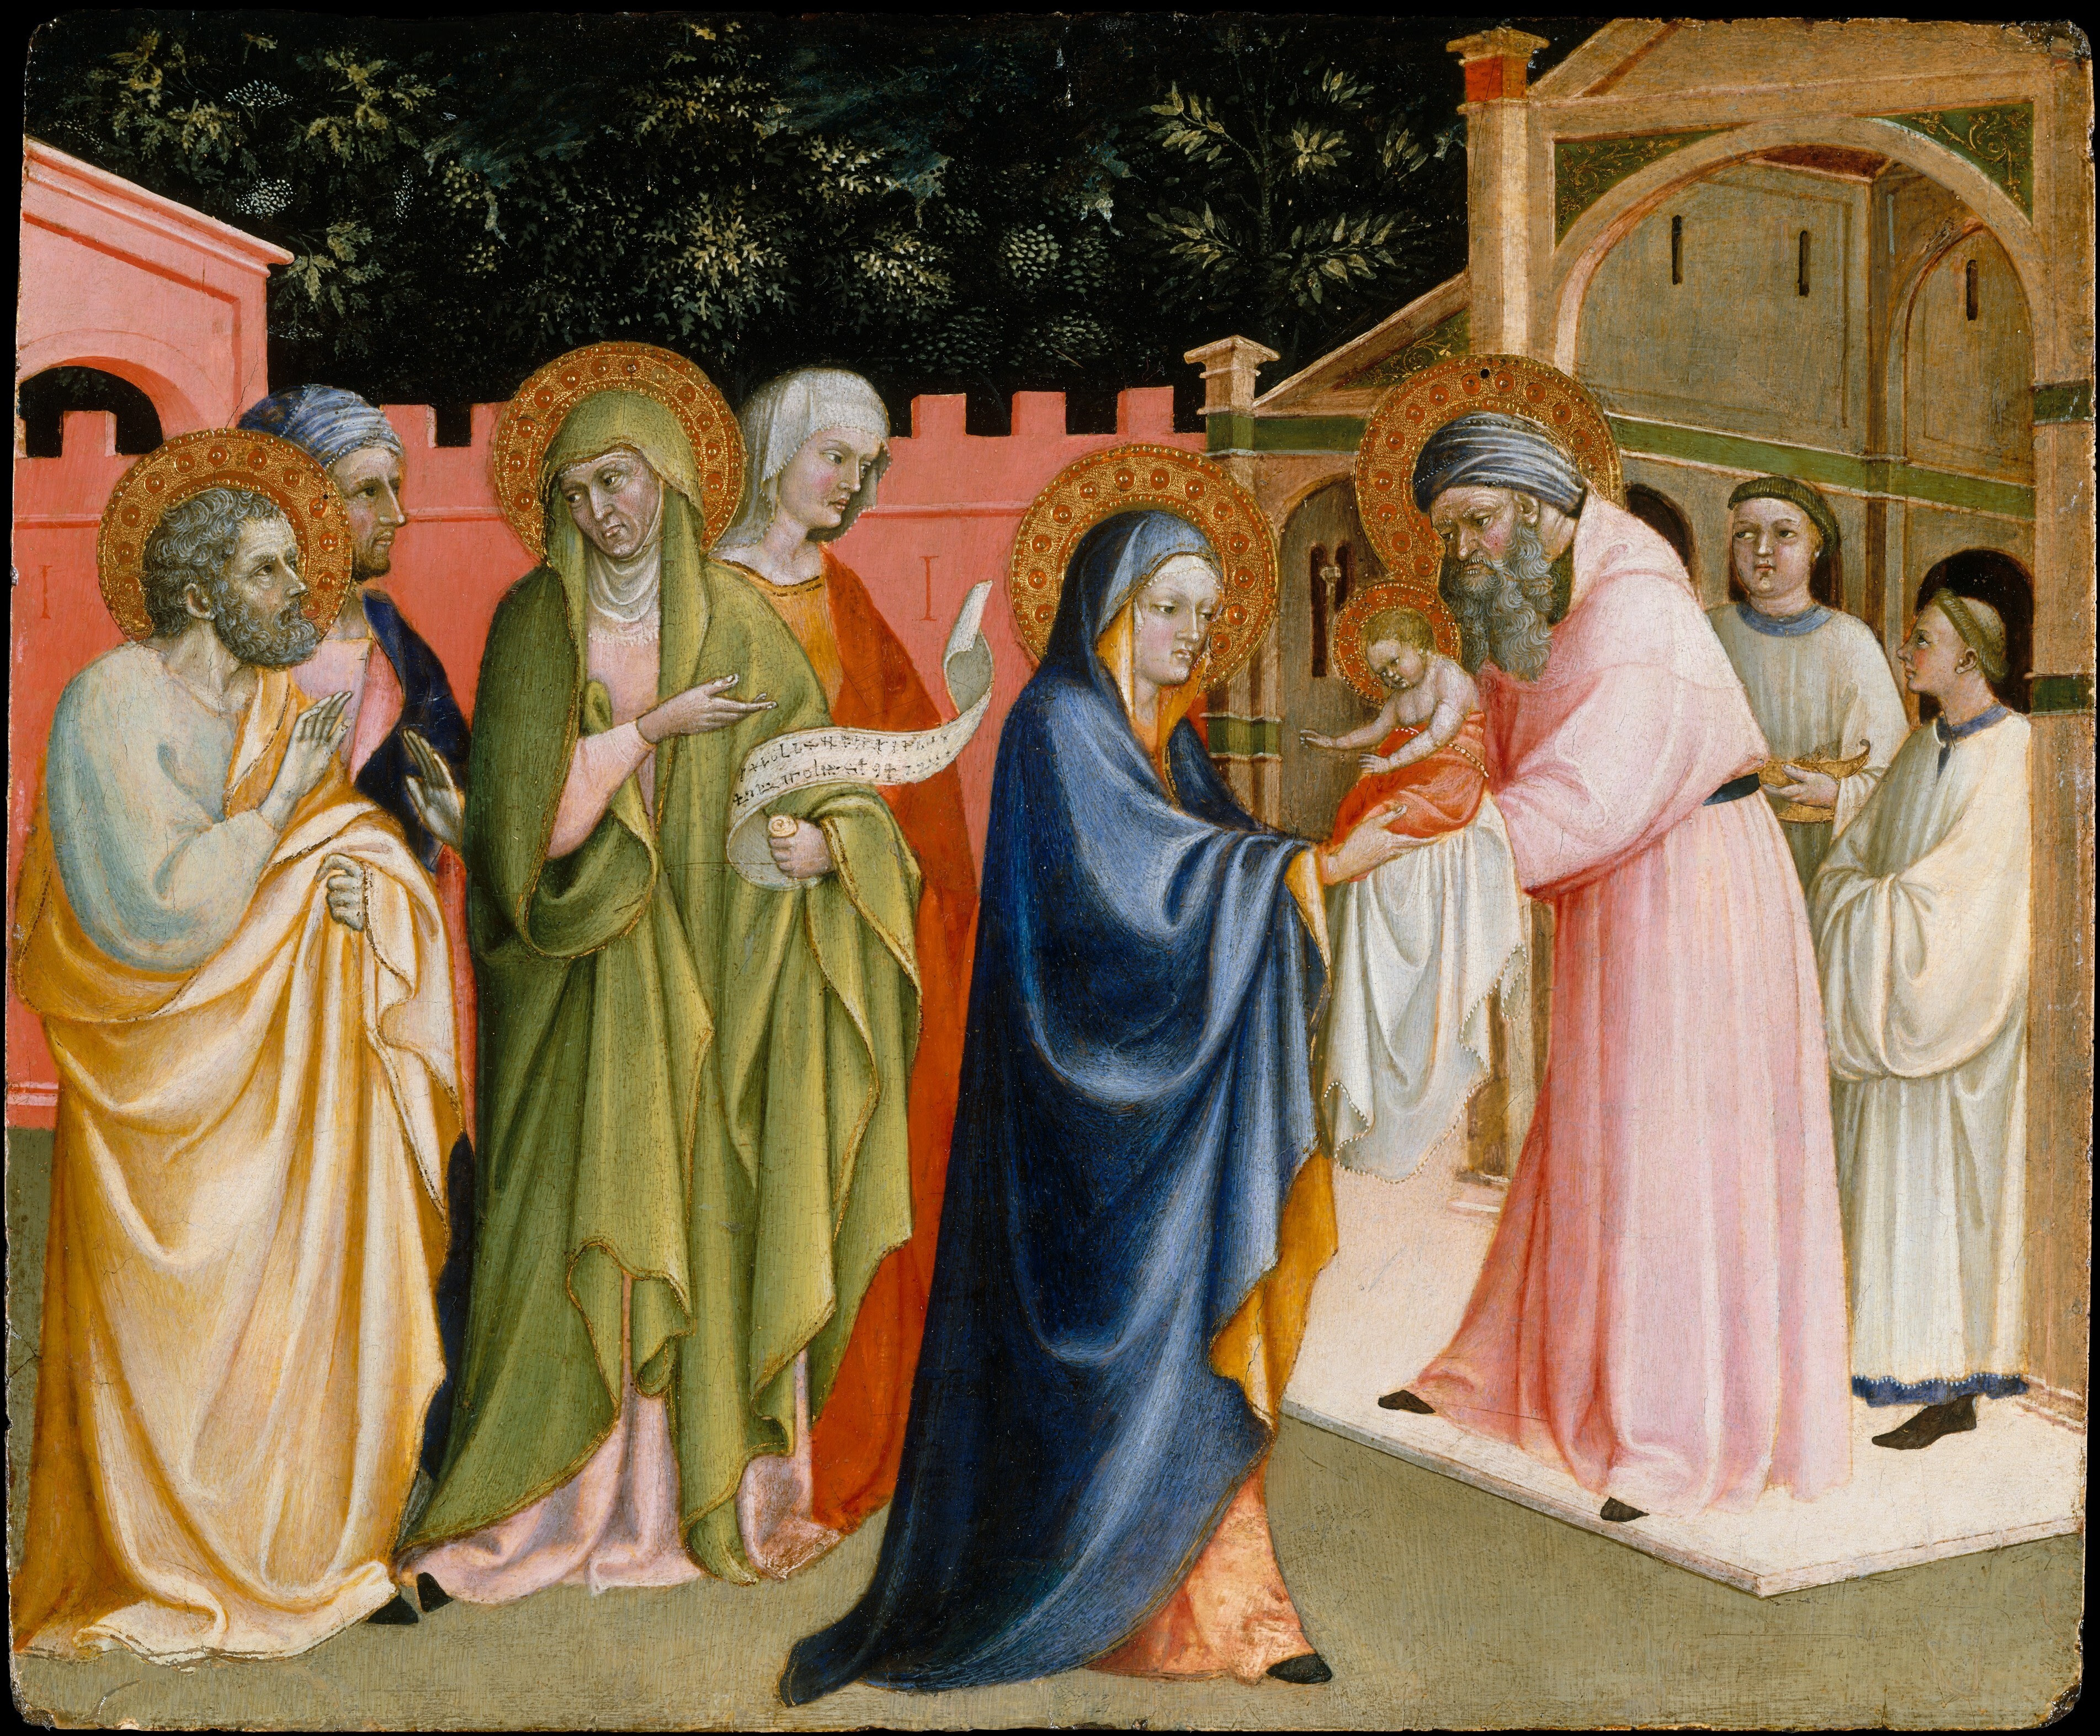 Mary  presents Jesus to Simeon, while Anna, holding a scroll speaks to Joseph.